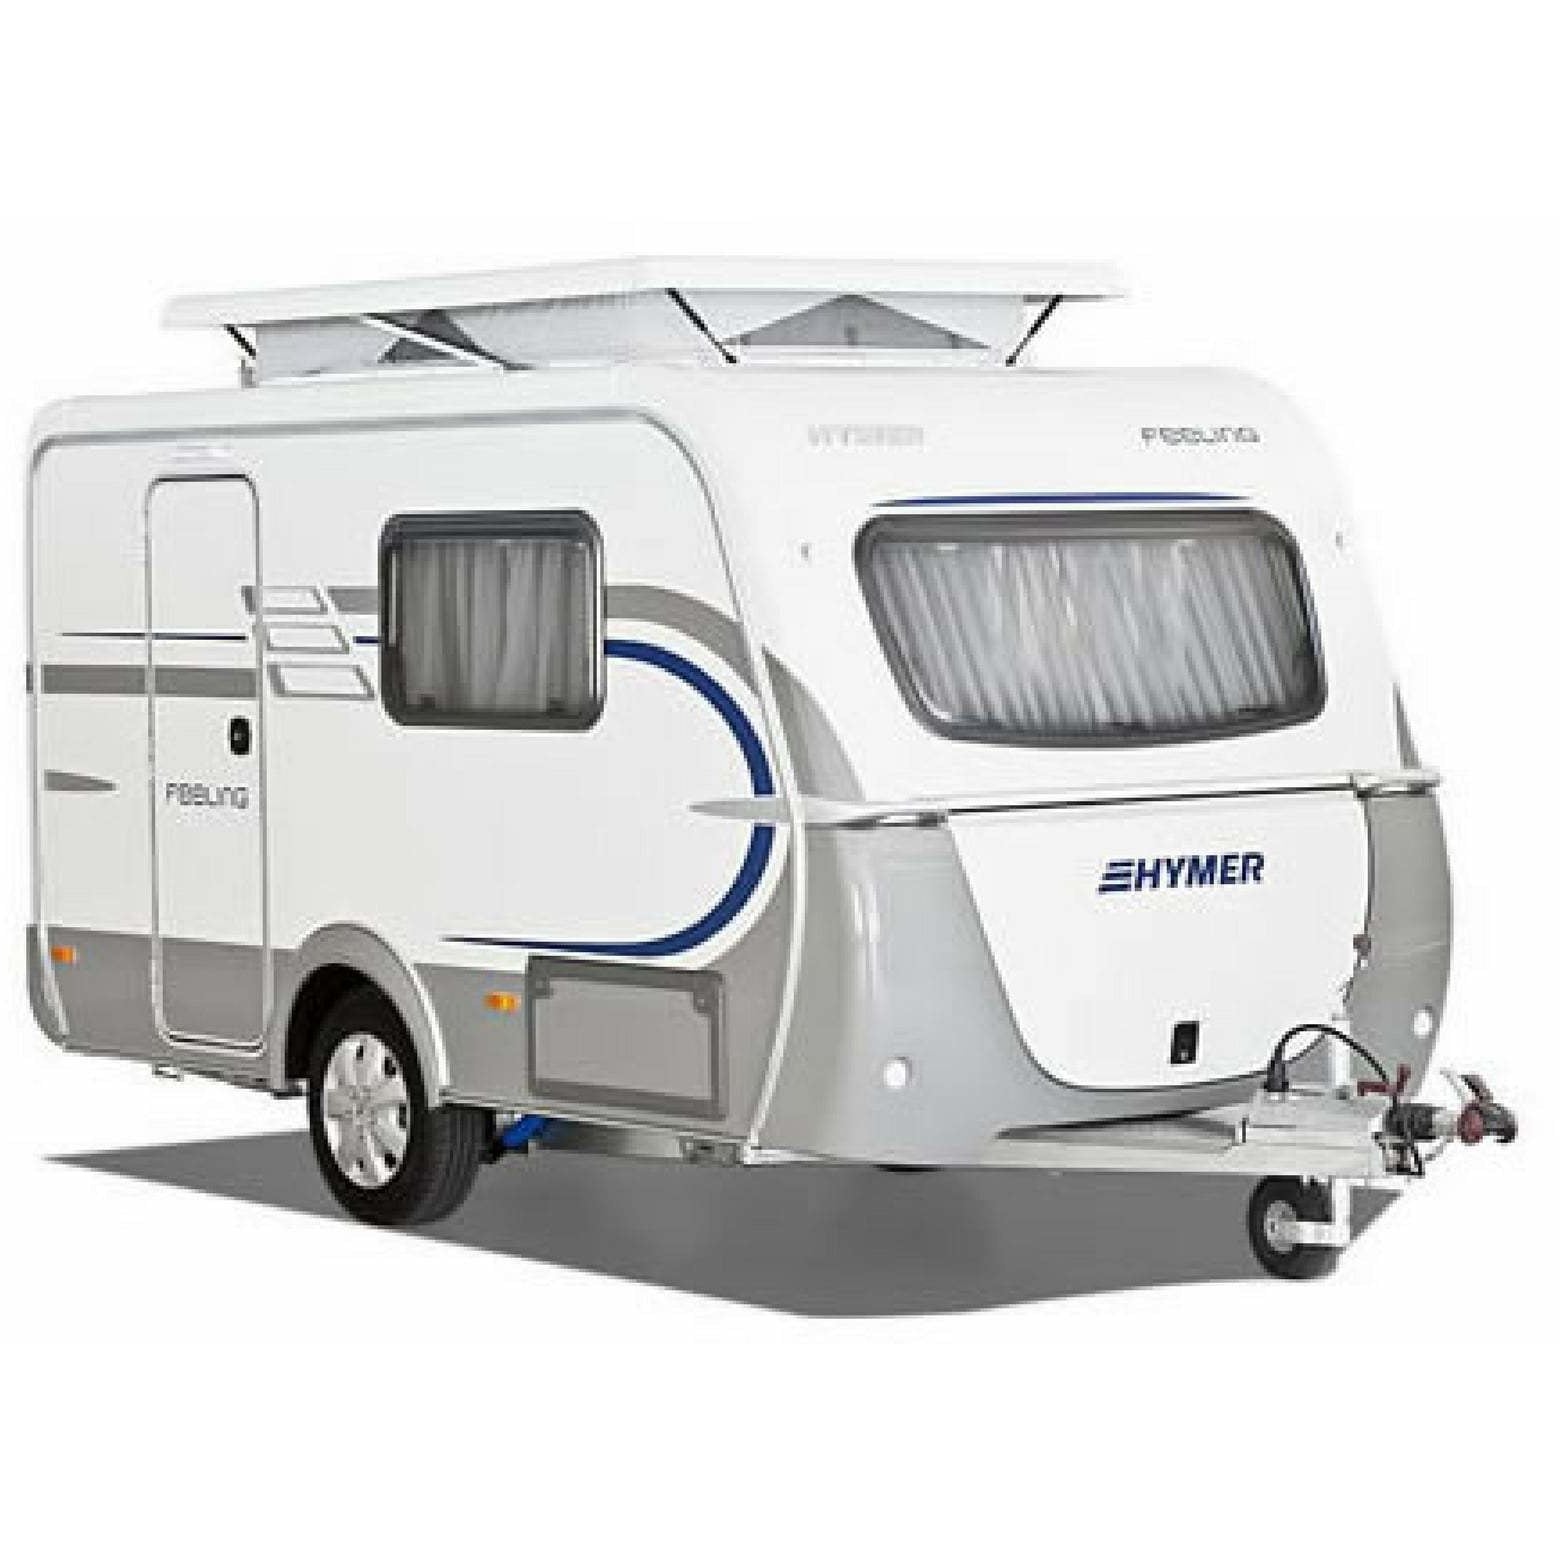 WALKER Weekender with Alloy Frame for Eriba Feeling (2018) + Free Storm Straps - Quality Caravan Awnings